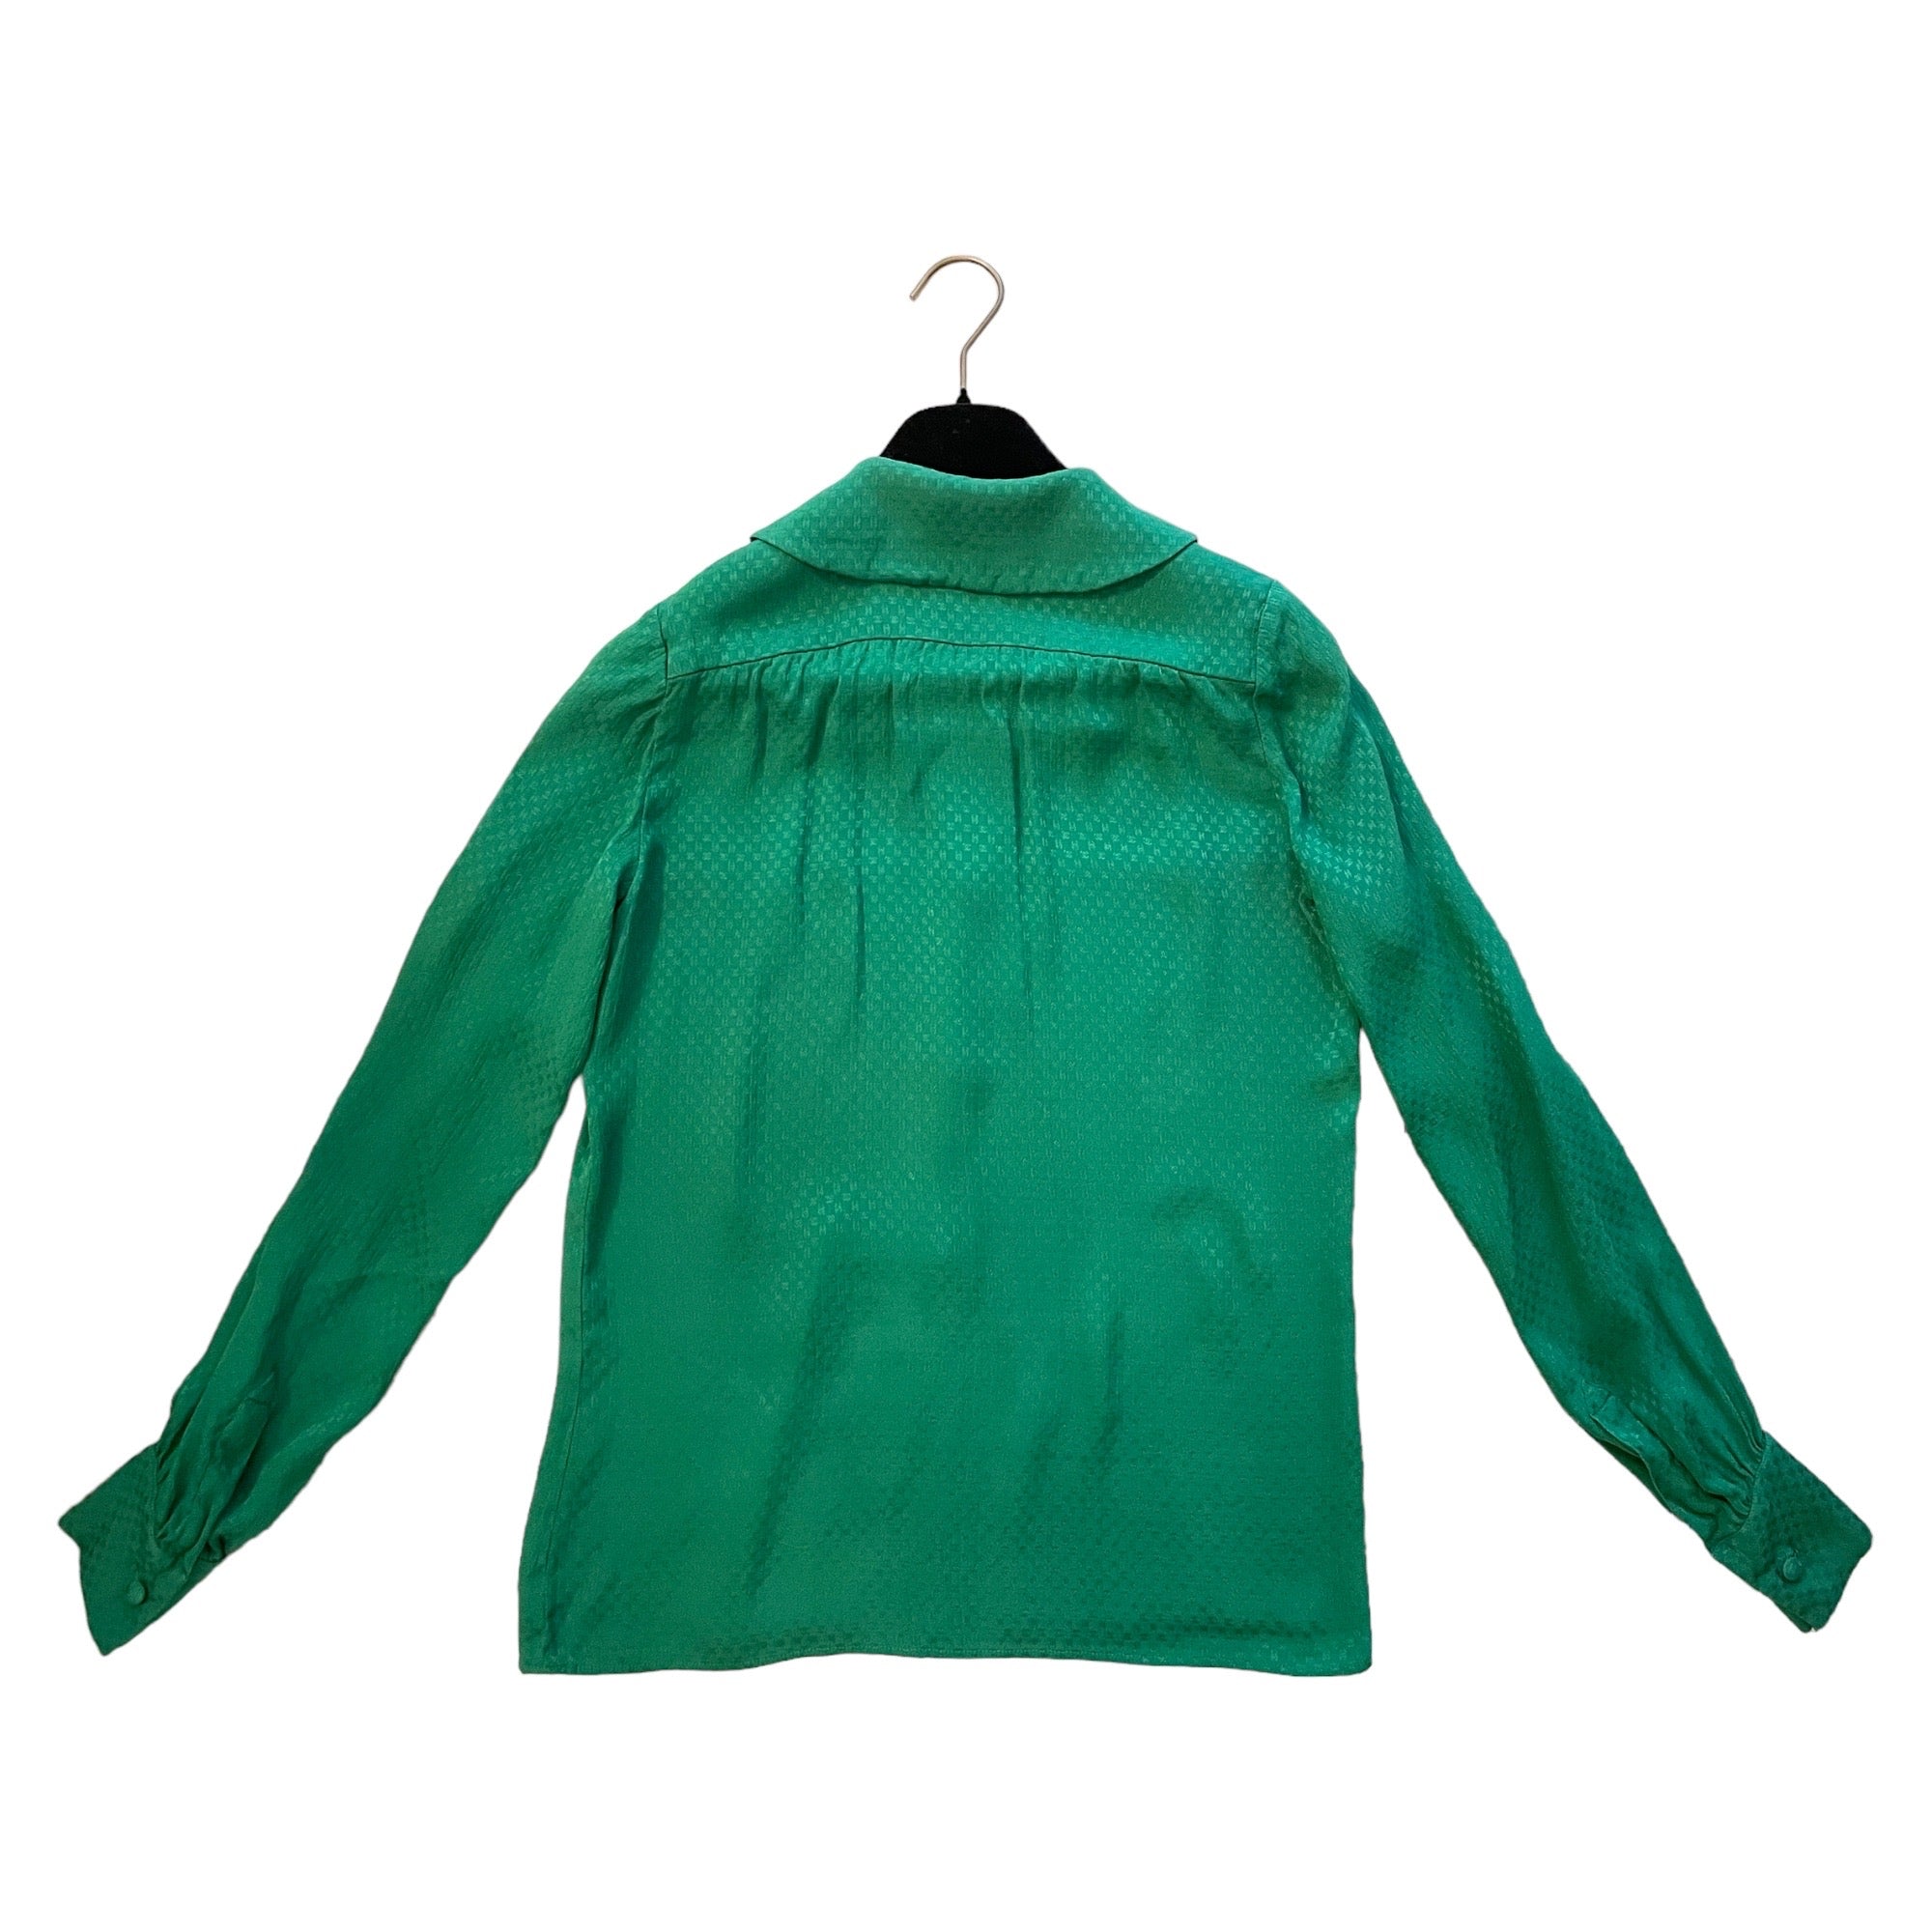 EXTREMELY RARE CHANEL Vintage STUNNING Emerald Green CC Logo Print Blouse